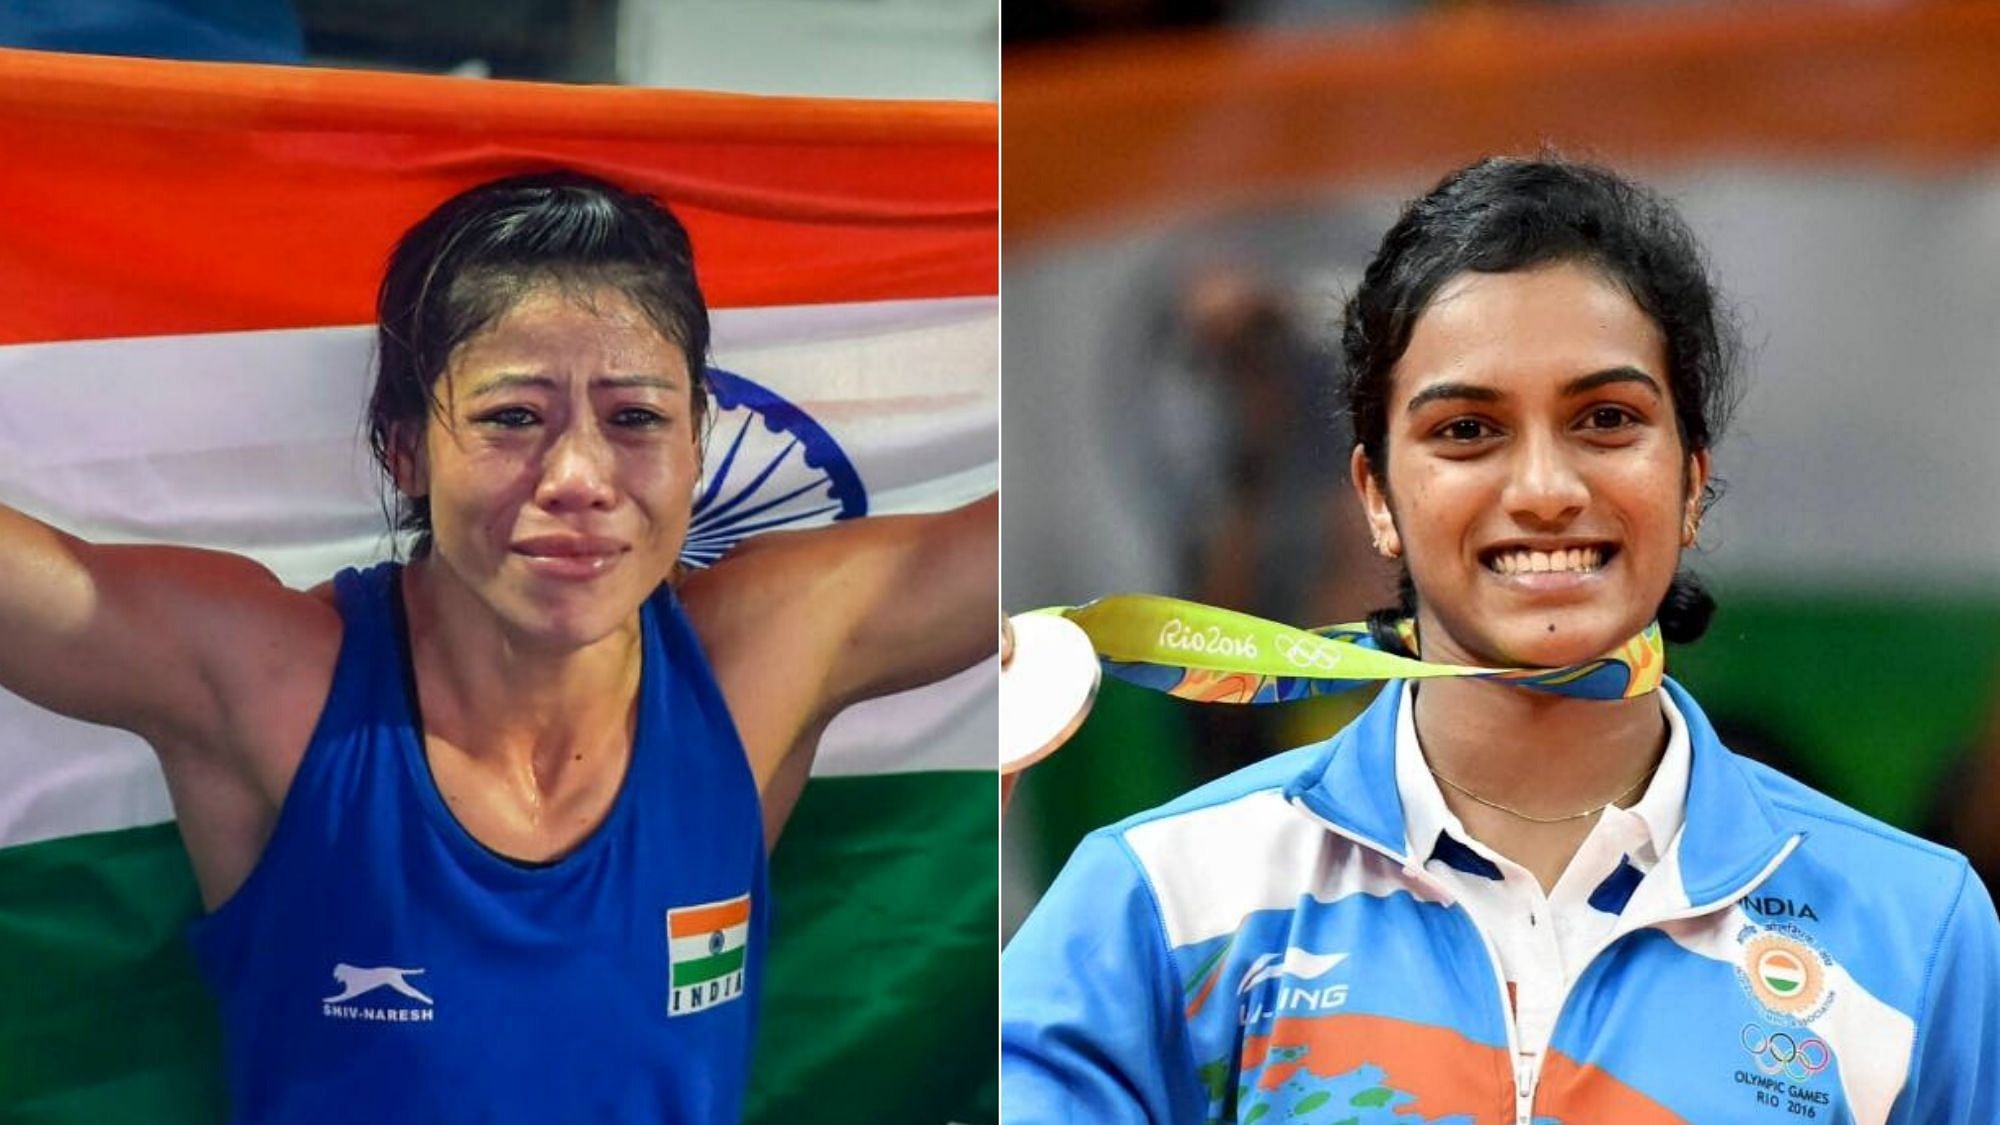 MC Mary Kom will be conferred with the Padma Vibhushan, while PV Sindhu will be bestowed with the Padma Bhushan.